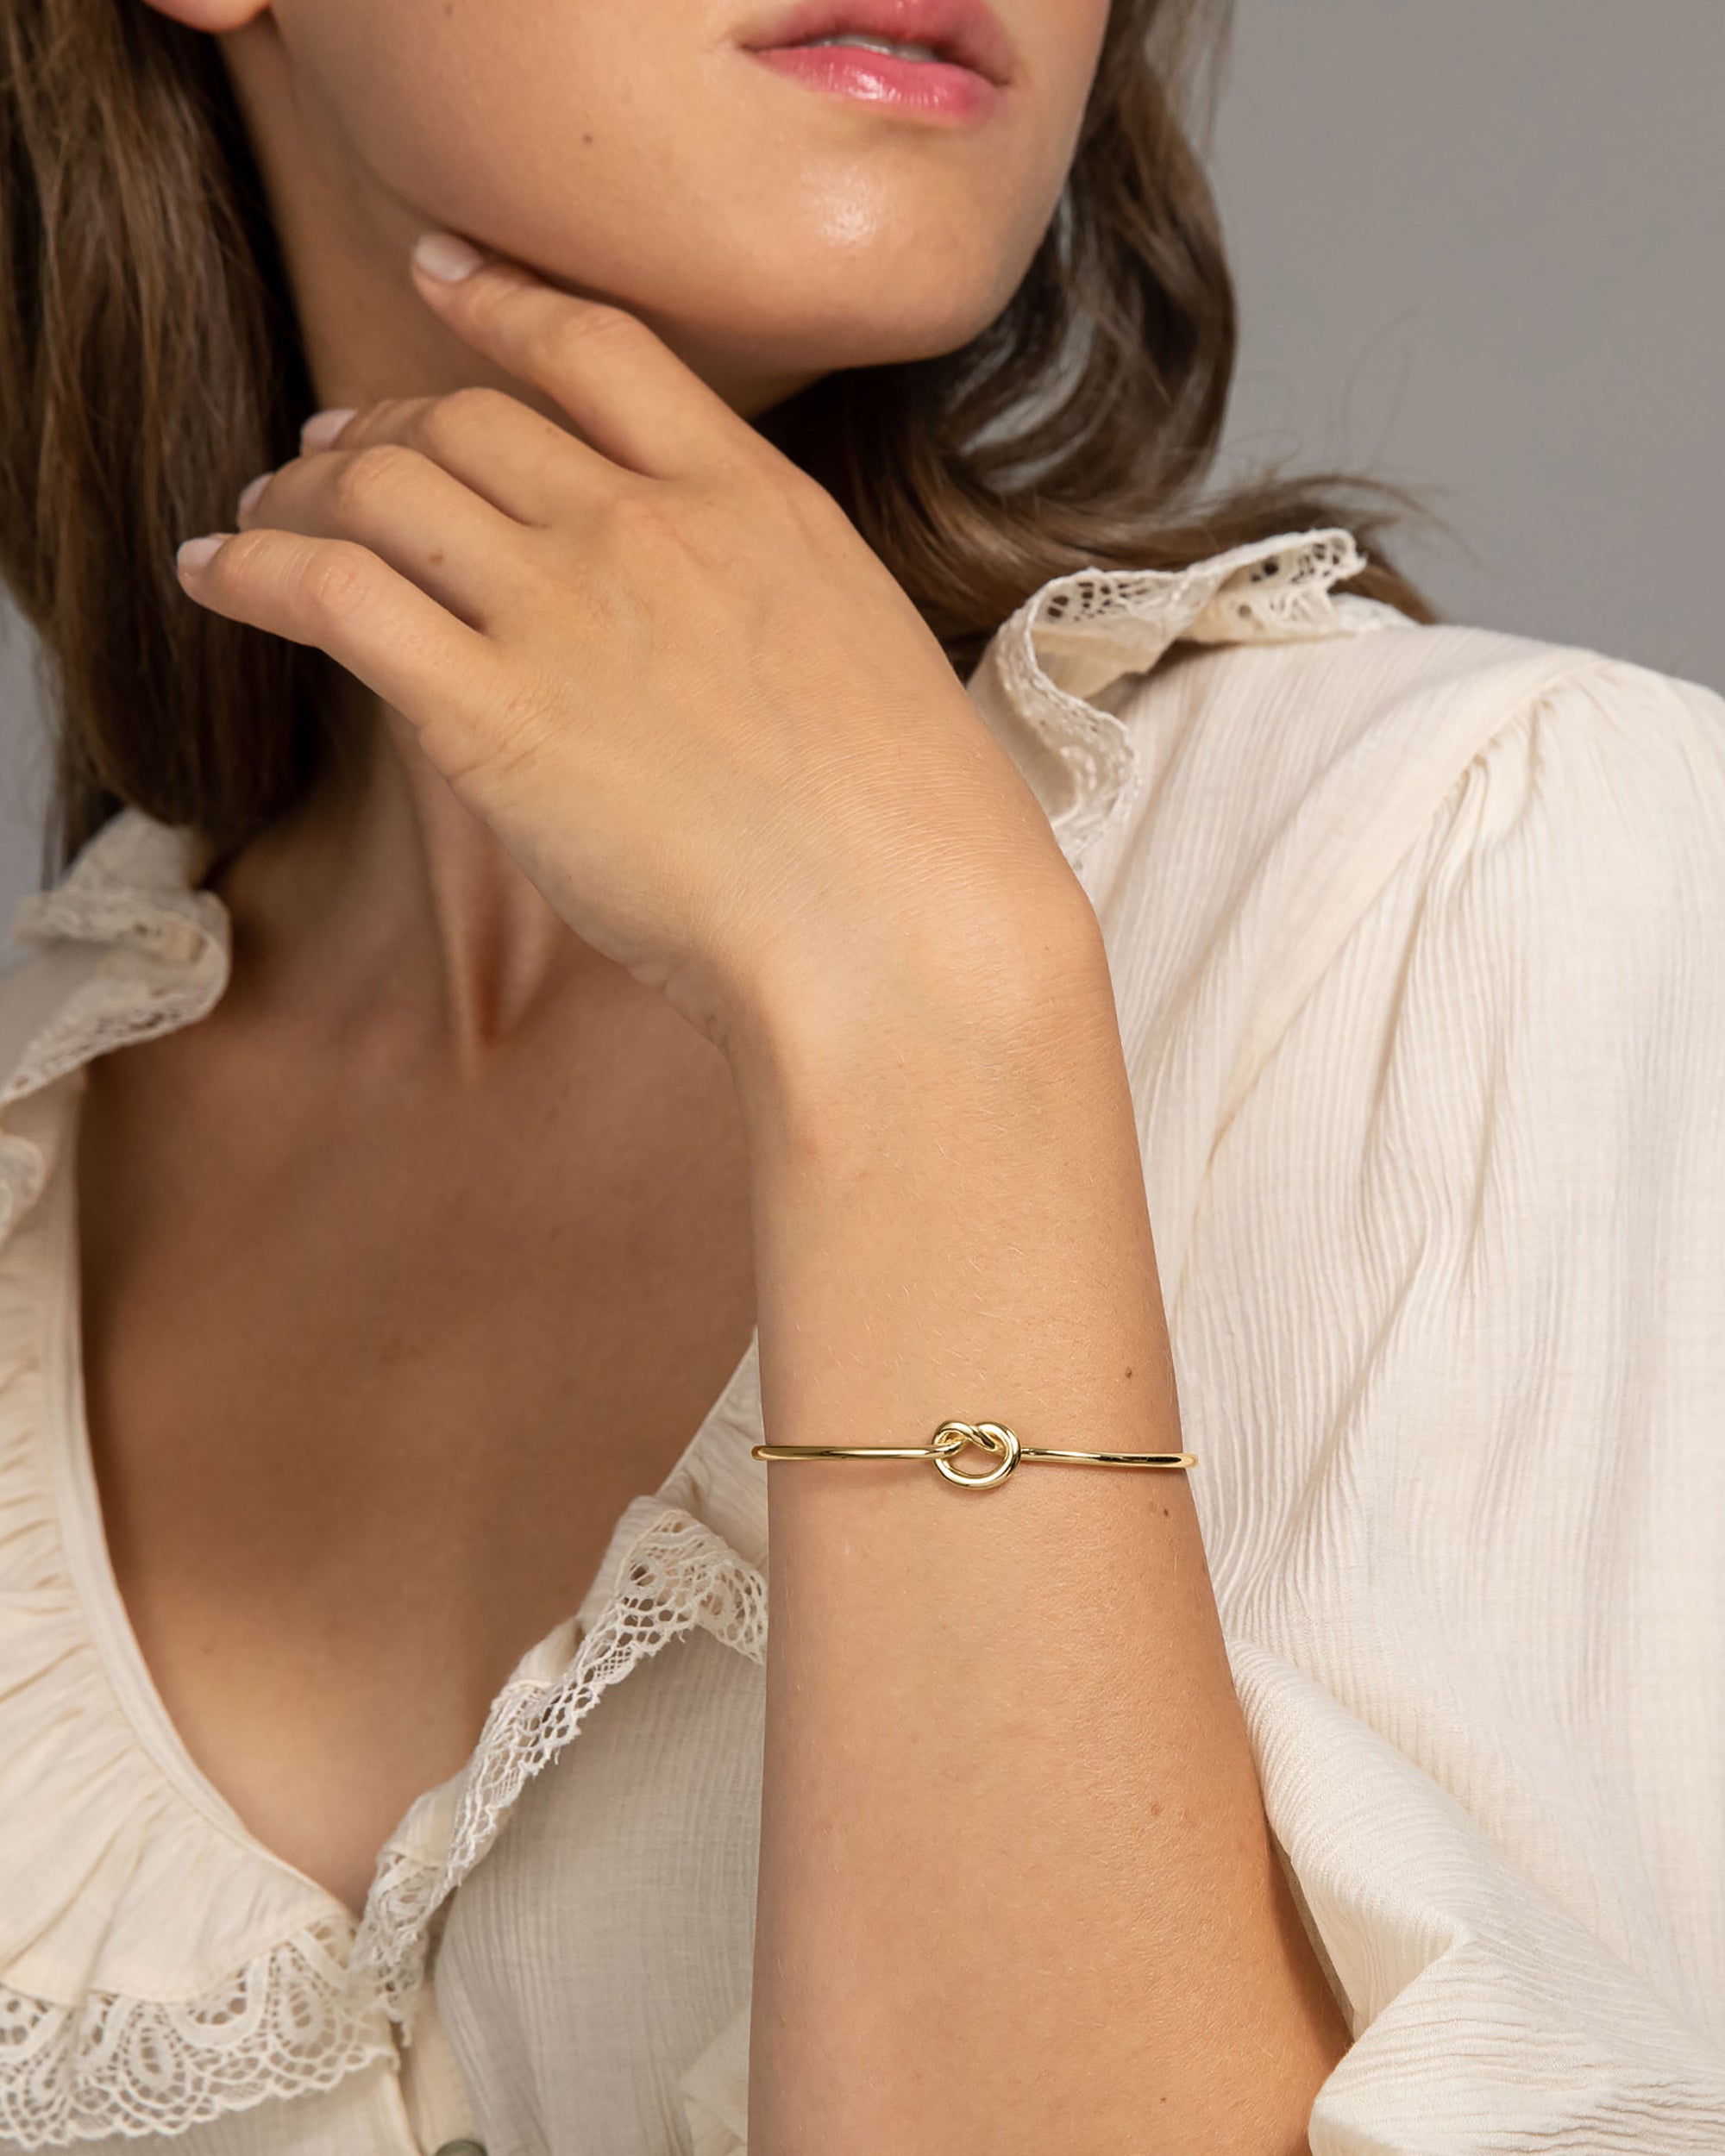 SEE PHOTOS: Affordable bracelet bling for your workwear outfits